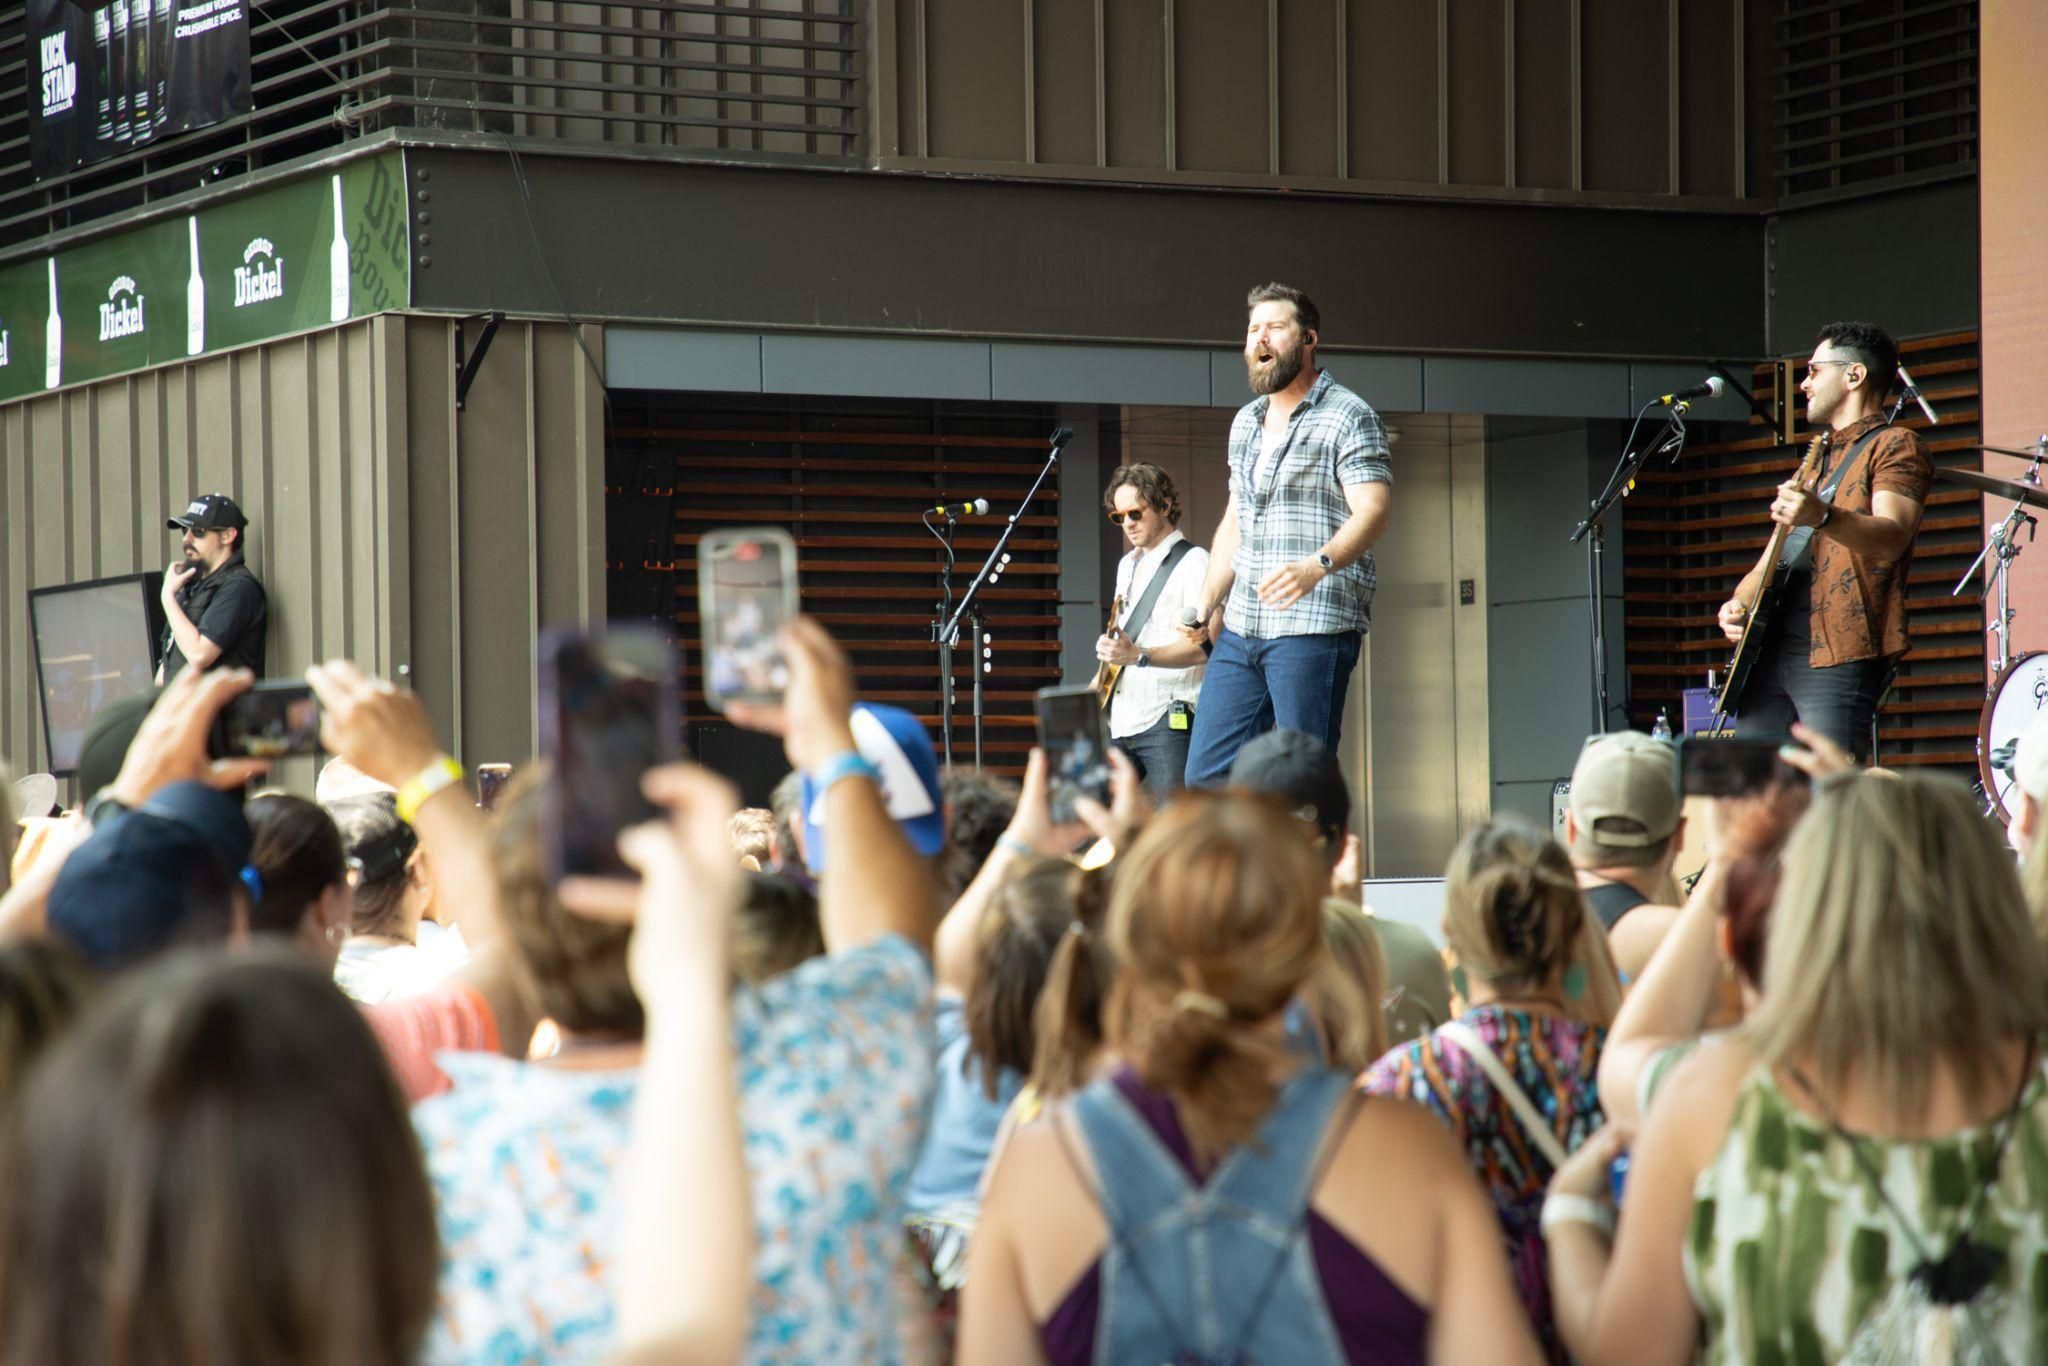 MUSIC IS UNIVERSAL AT SKYDECK ON BROADWAY KICKS OFF ITS FIRST TWO DAYS WITH PERFORMANCES AND FAN CLUB PARTIES WITH COUNTRY’S BIGGEST ARTISTS AND RISING STARS